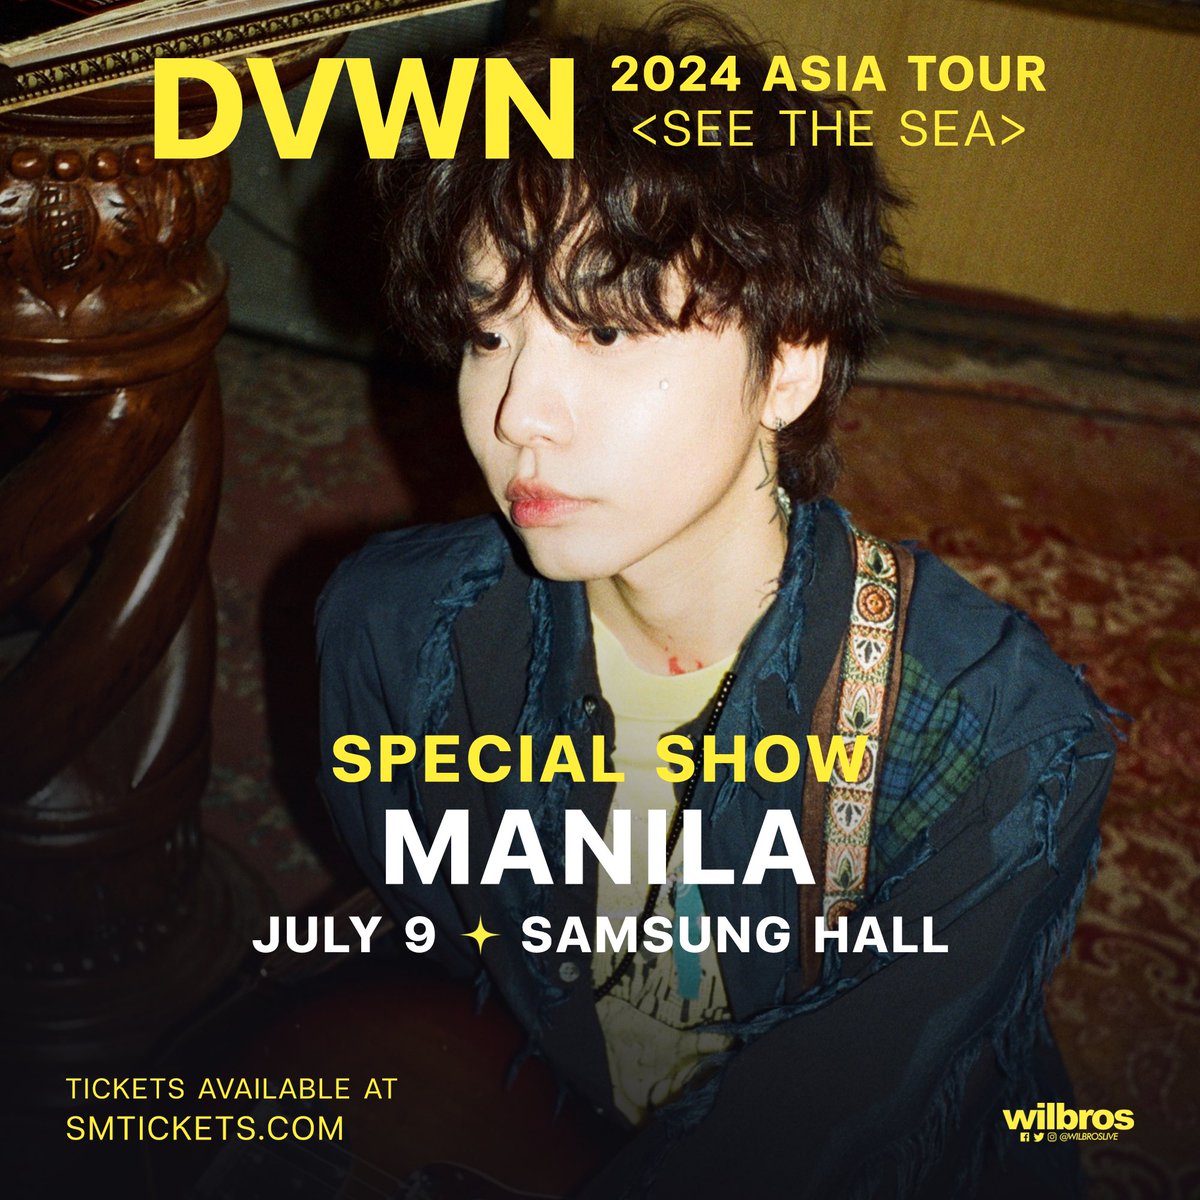 KHIPHOP & KRNB enthusiasts 𝐃𝐕𝐖𝐍 is coming to Manila for the first-time and for a special concert!

DVWN
2024 ASIA TOUR <SEE THE SEA>
SPECIAL SHOW ~ MANILA
July 9 • Samsung Hall (SM Aura)

Presented by @WilbrosLive
#DVWN #MANILA #WilbrosLive